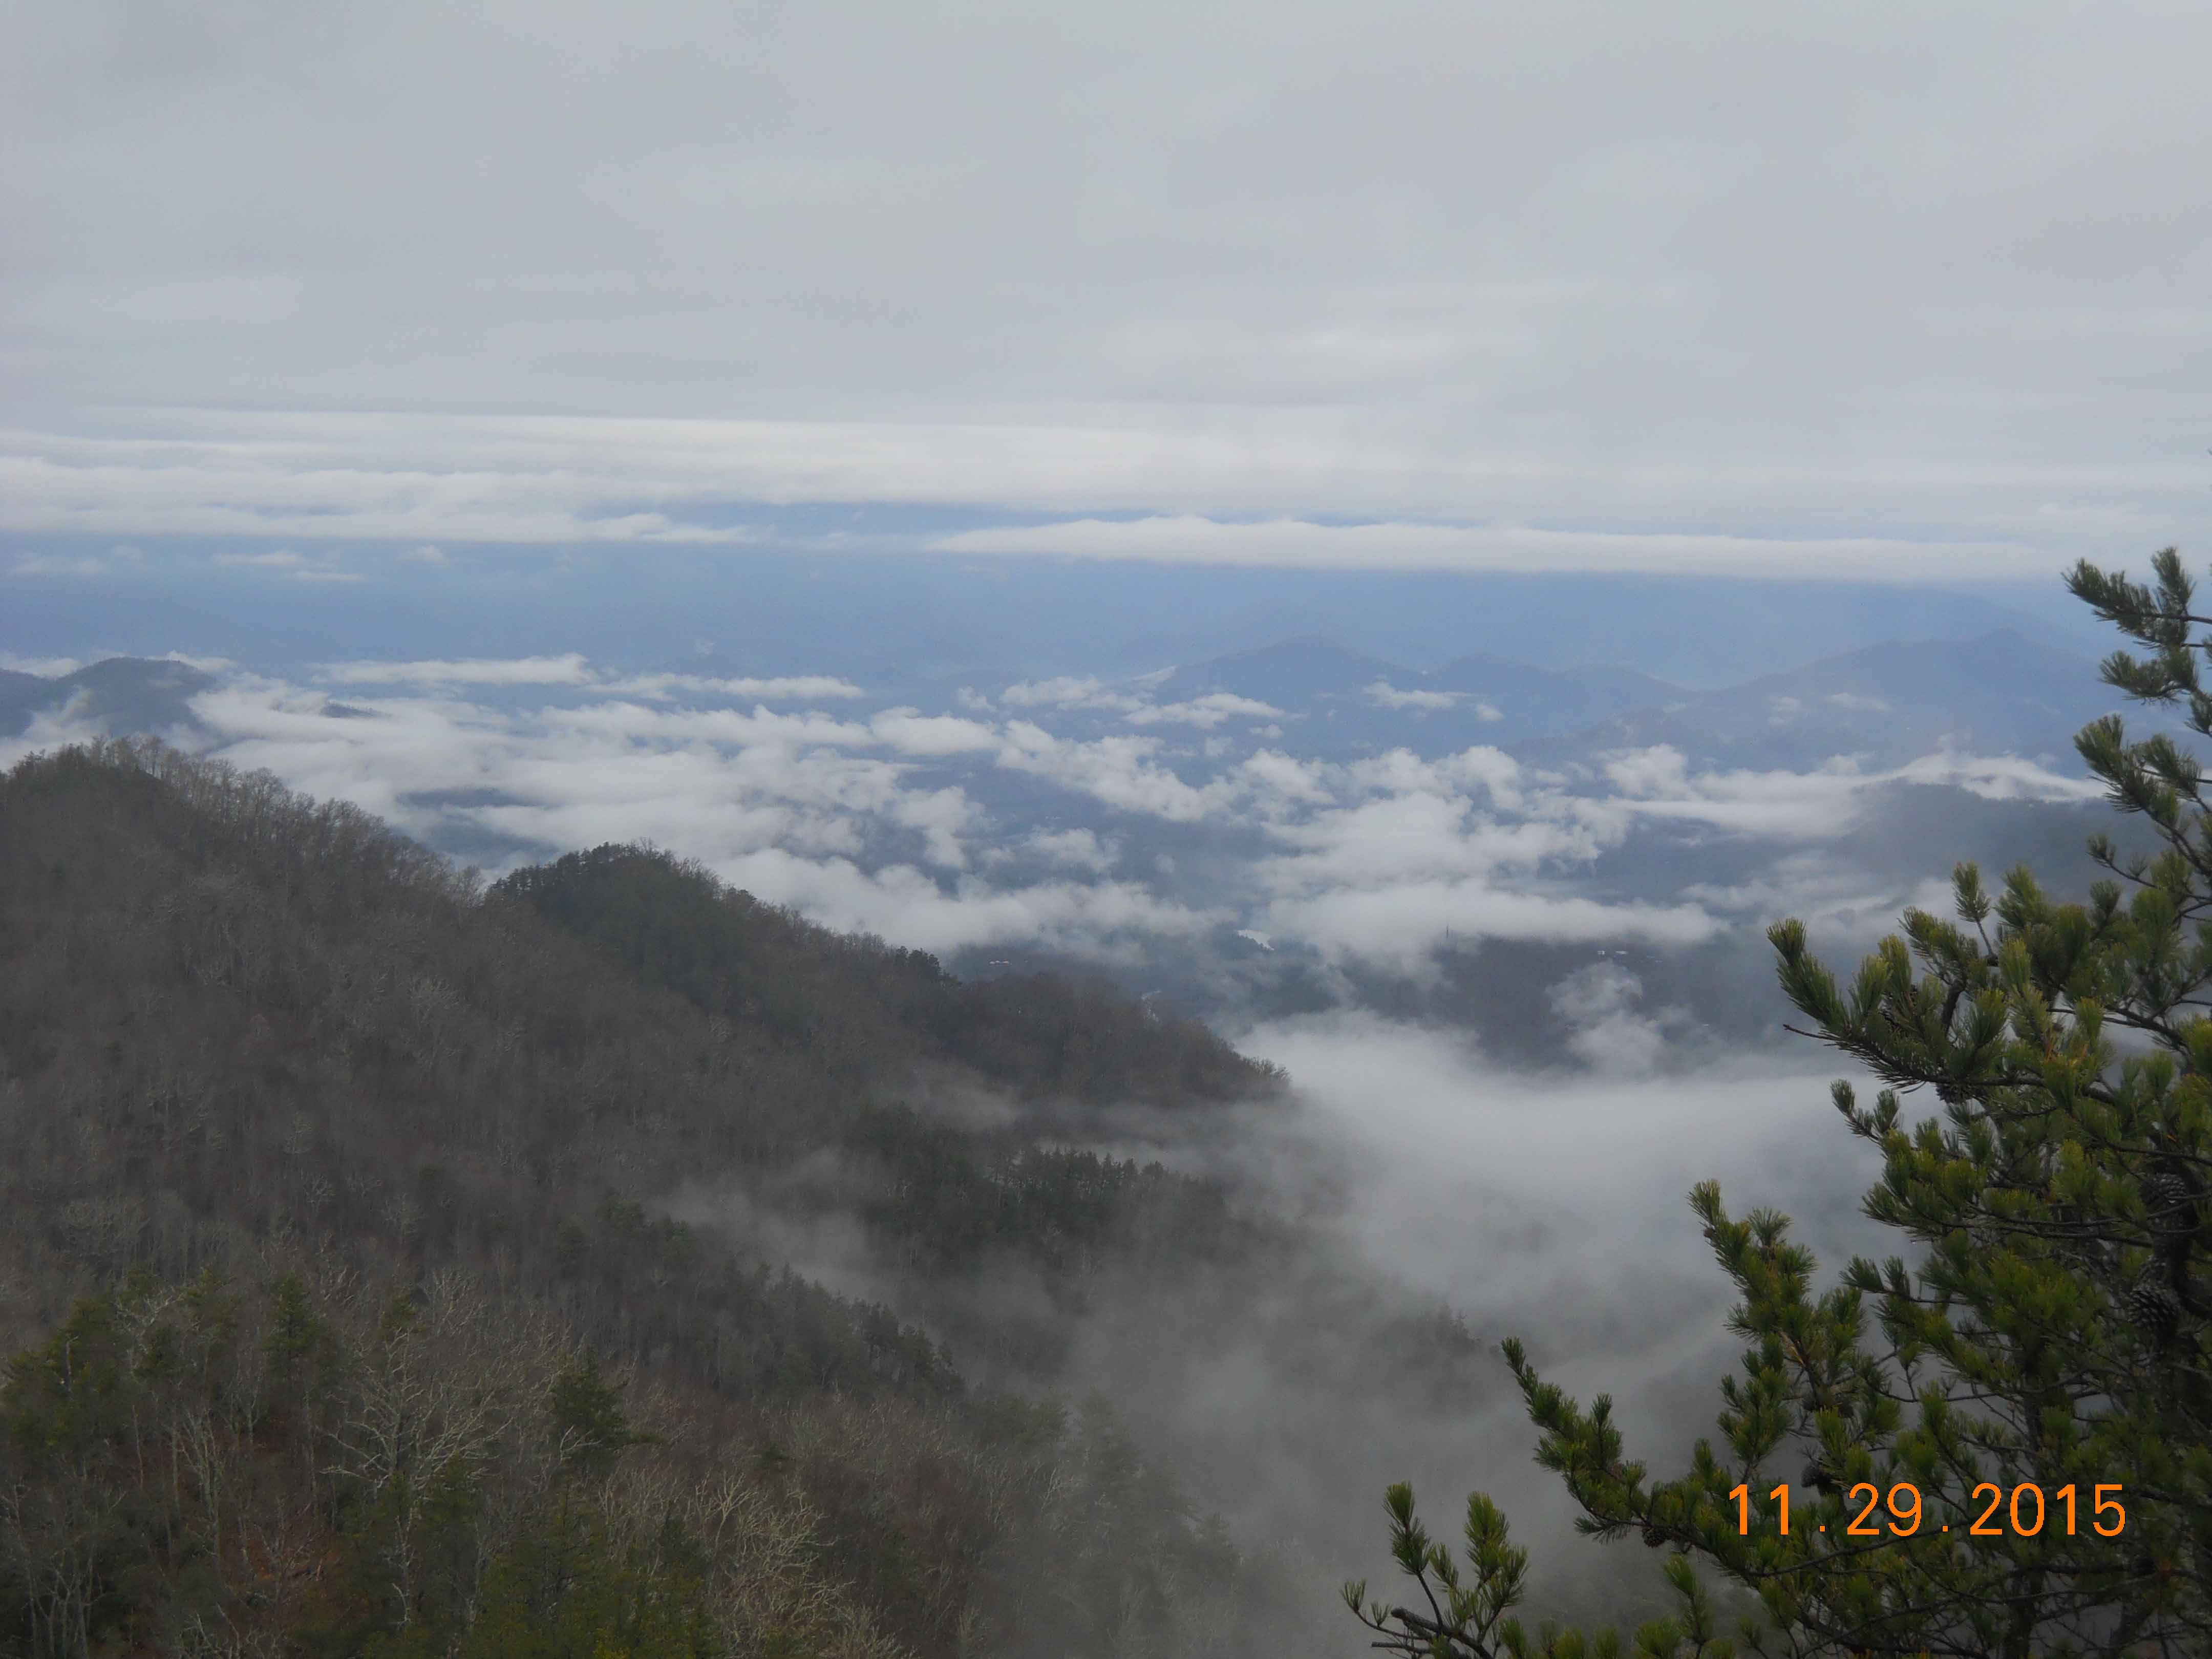 view from rock outcrop near top of jump-off afer rain  Courtesy jparton@hcsheriff.gov